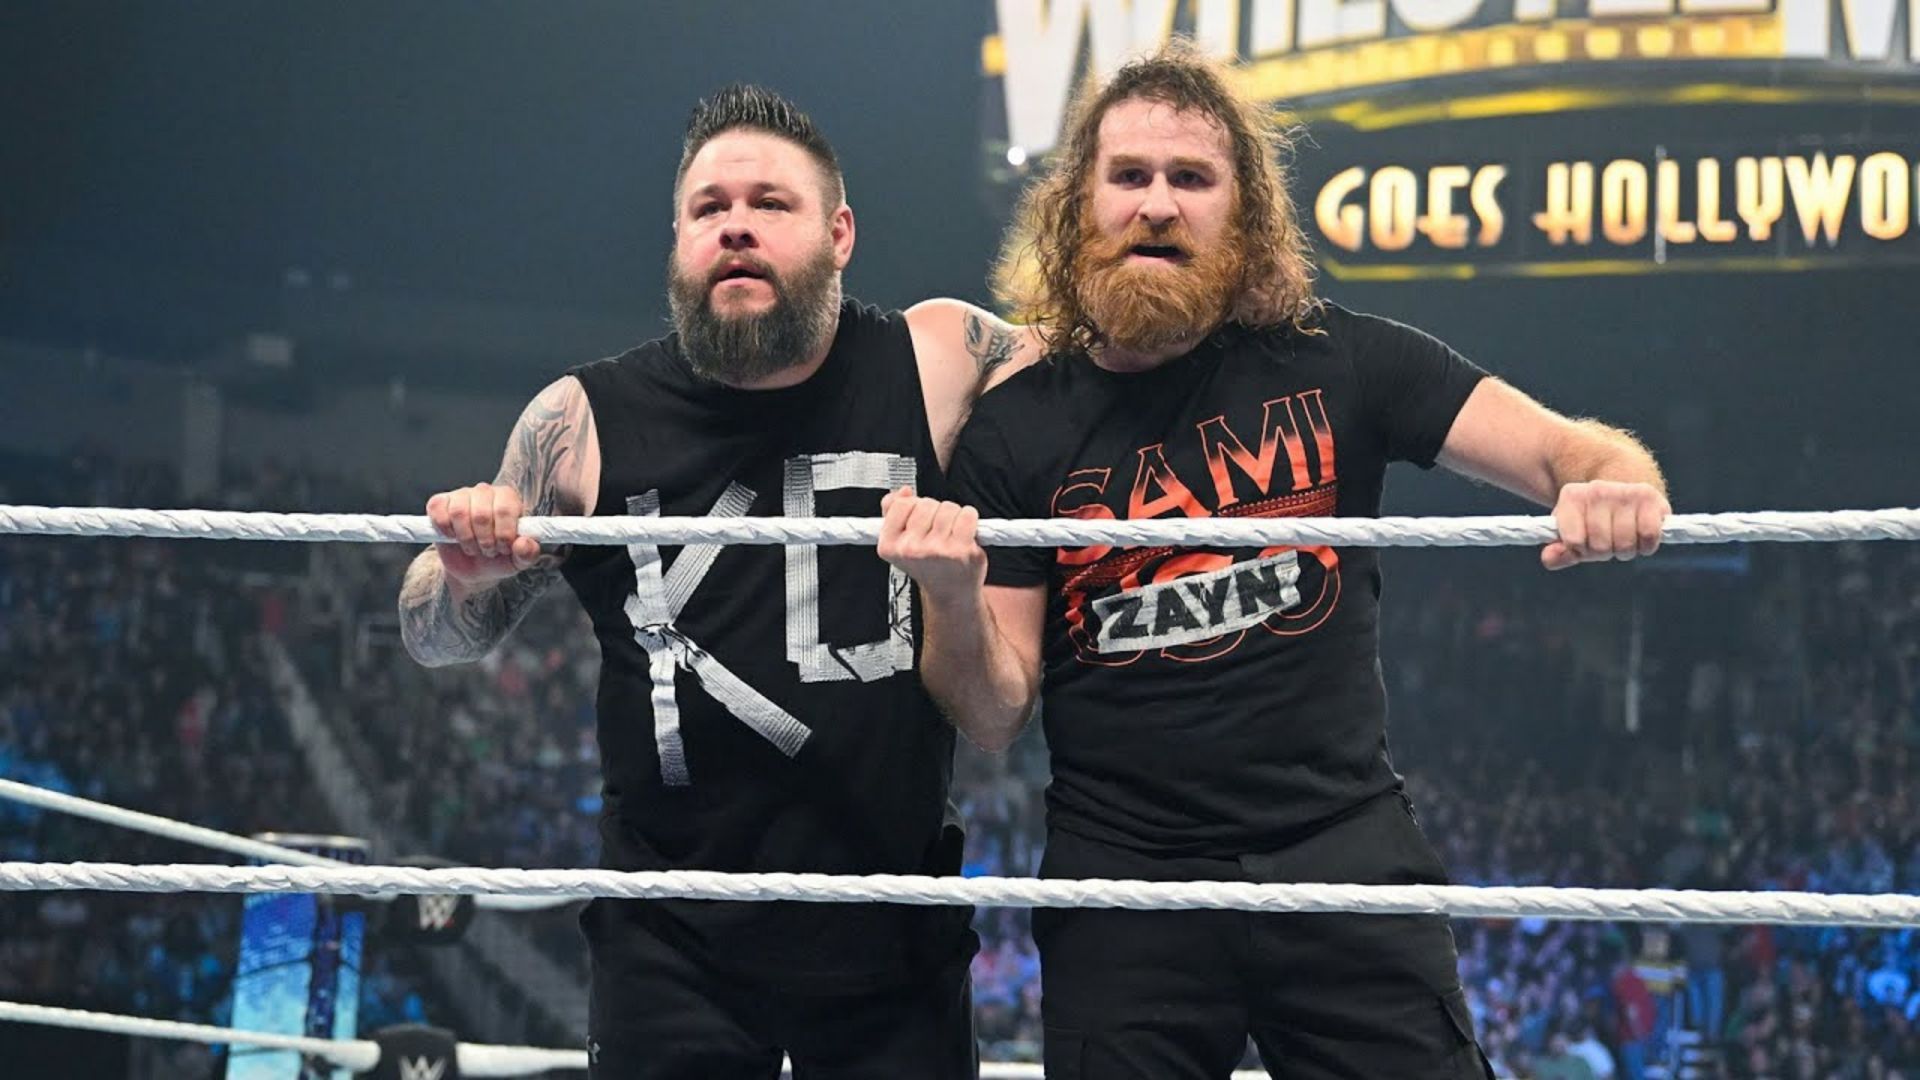 Sami Zayn and Kevin Owens will face The Usos at WWE WrestleMania 39